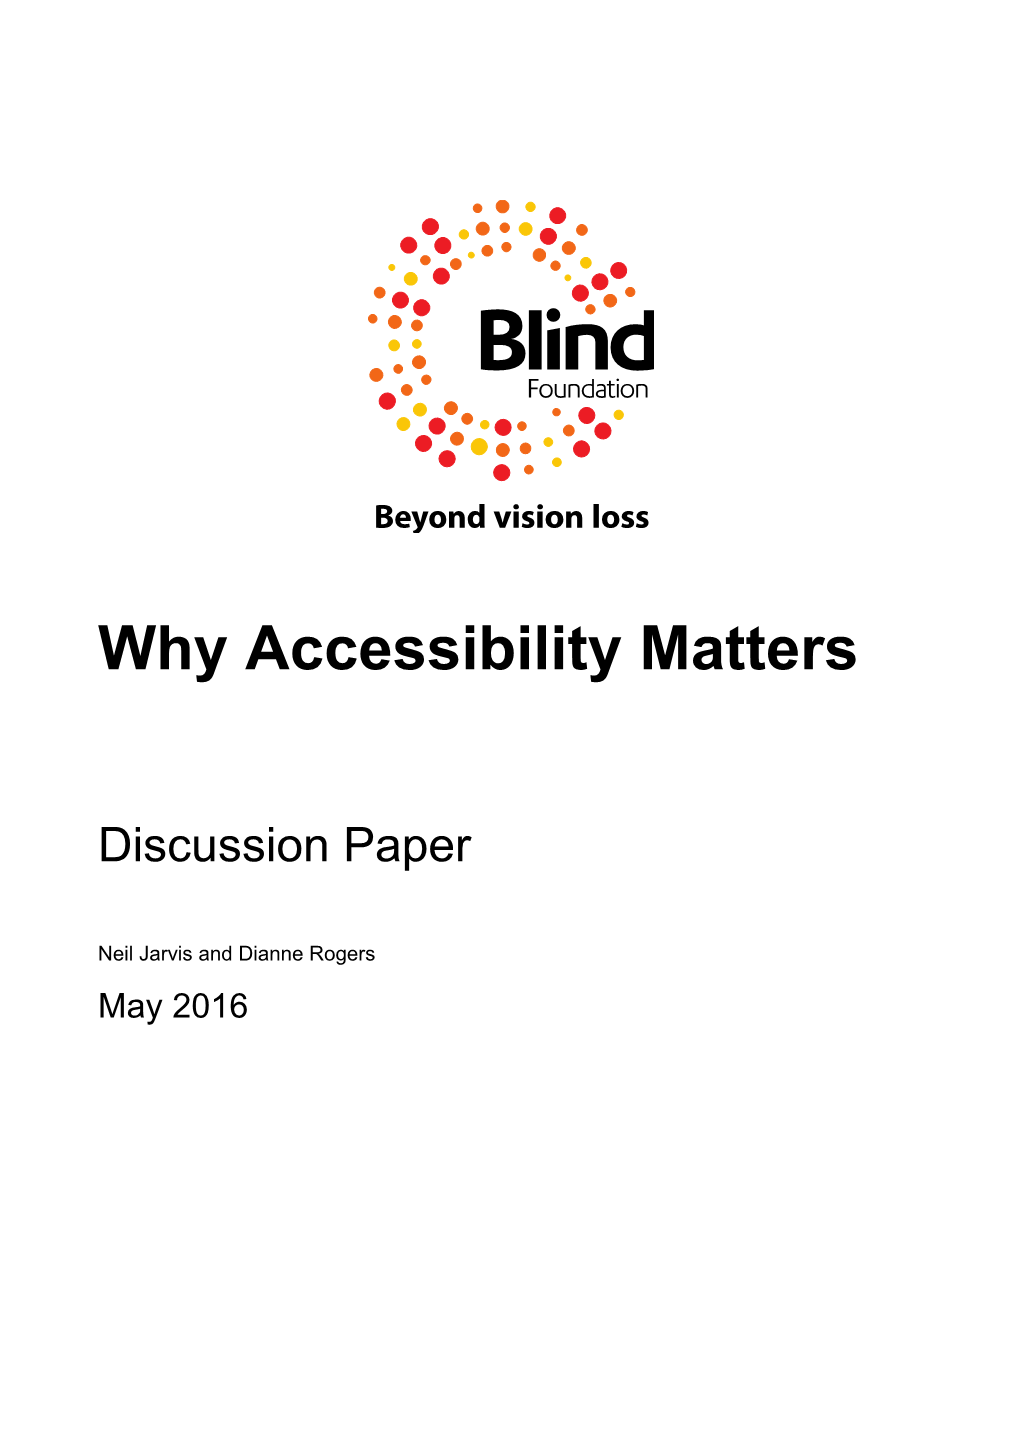 Why Accessibility Matters